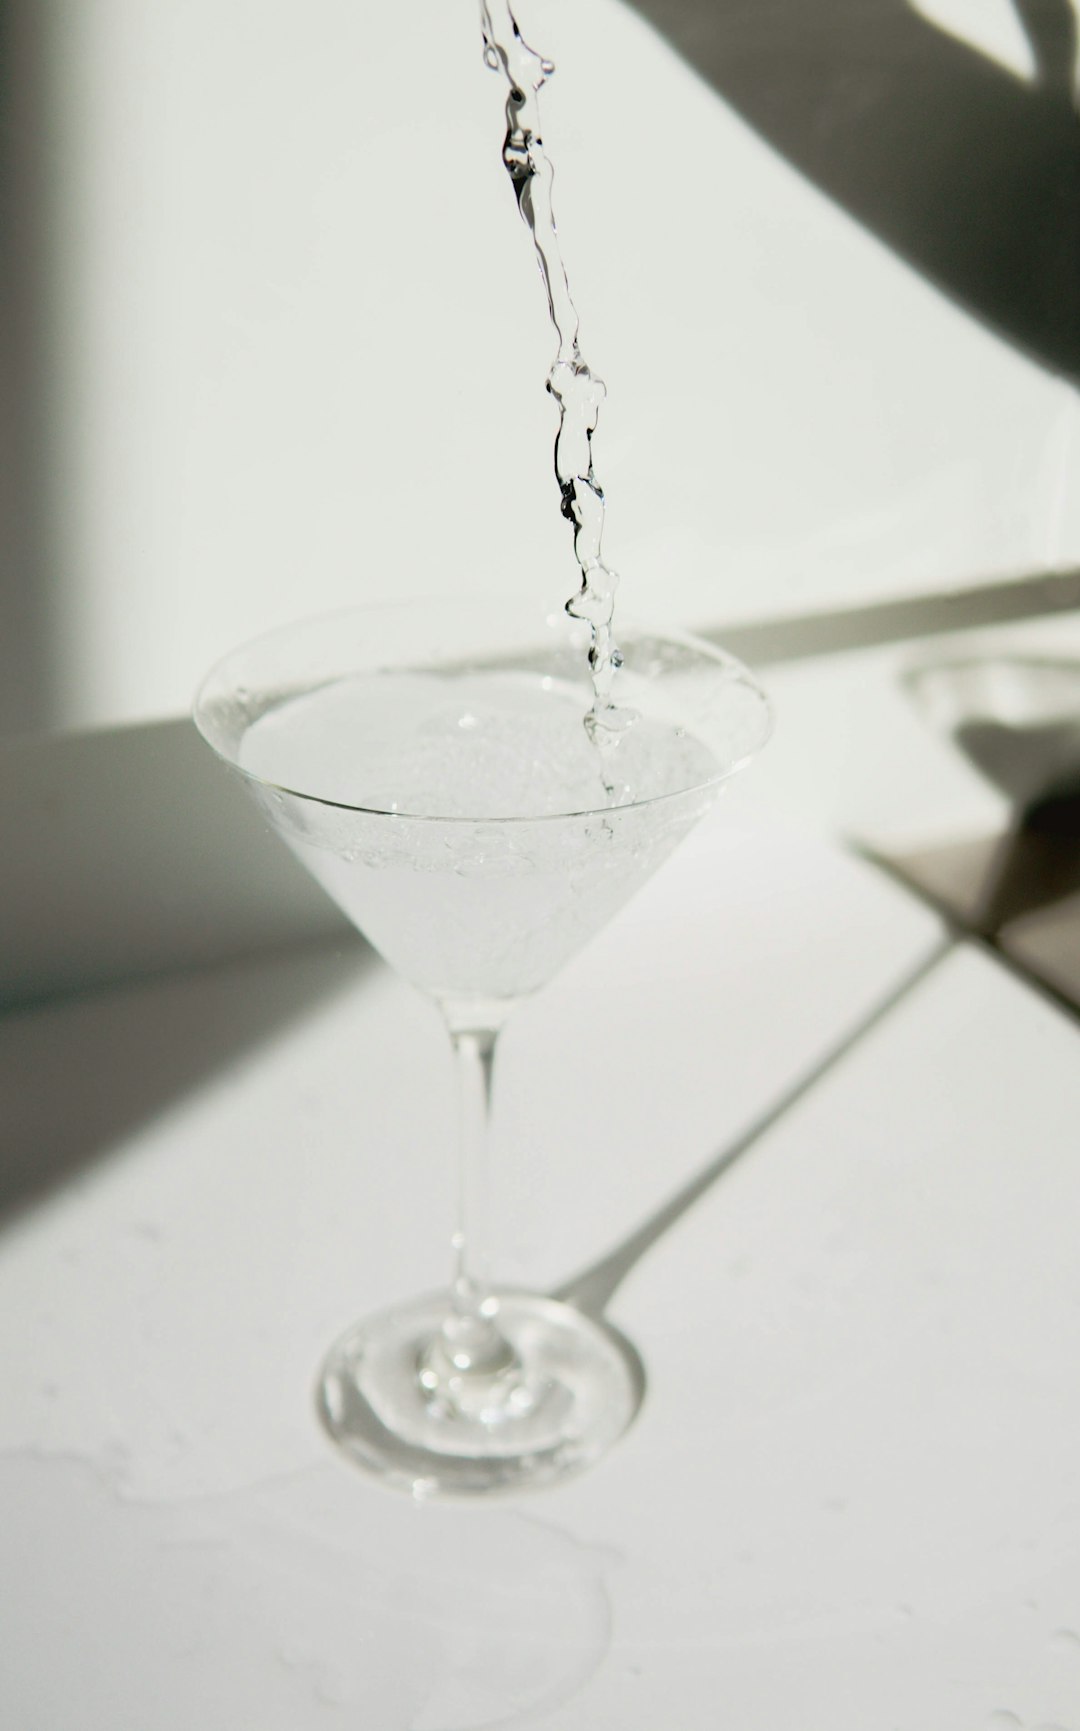 martini glass being filled with clear liquid, might be vodka